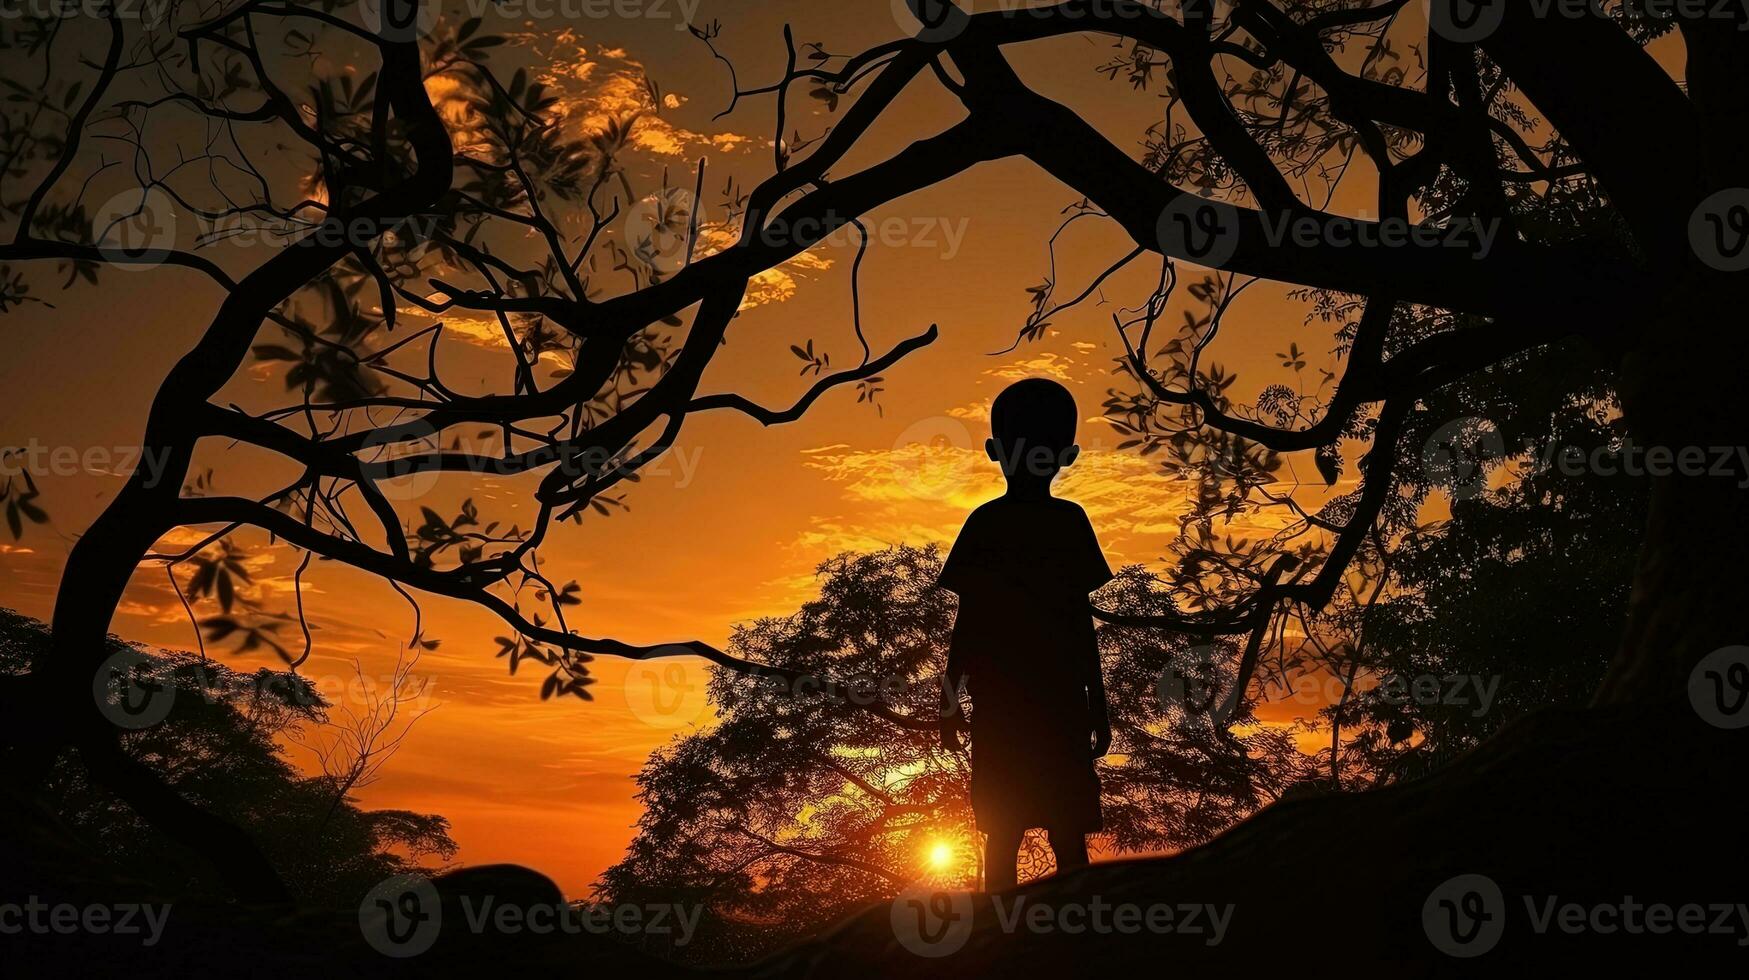 Asian child having a joyful time playing silhouette game during sunset photo